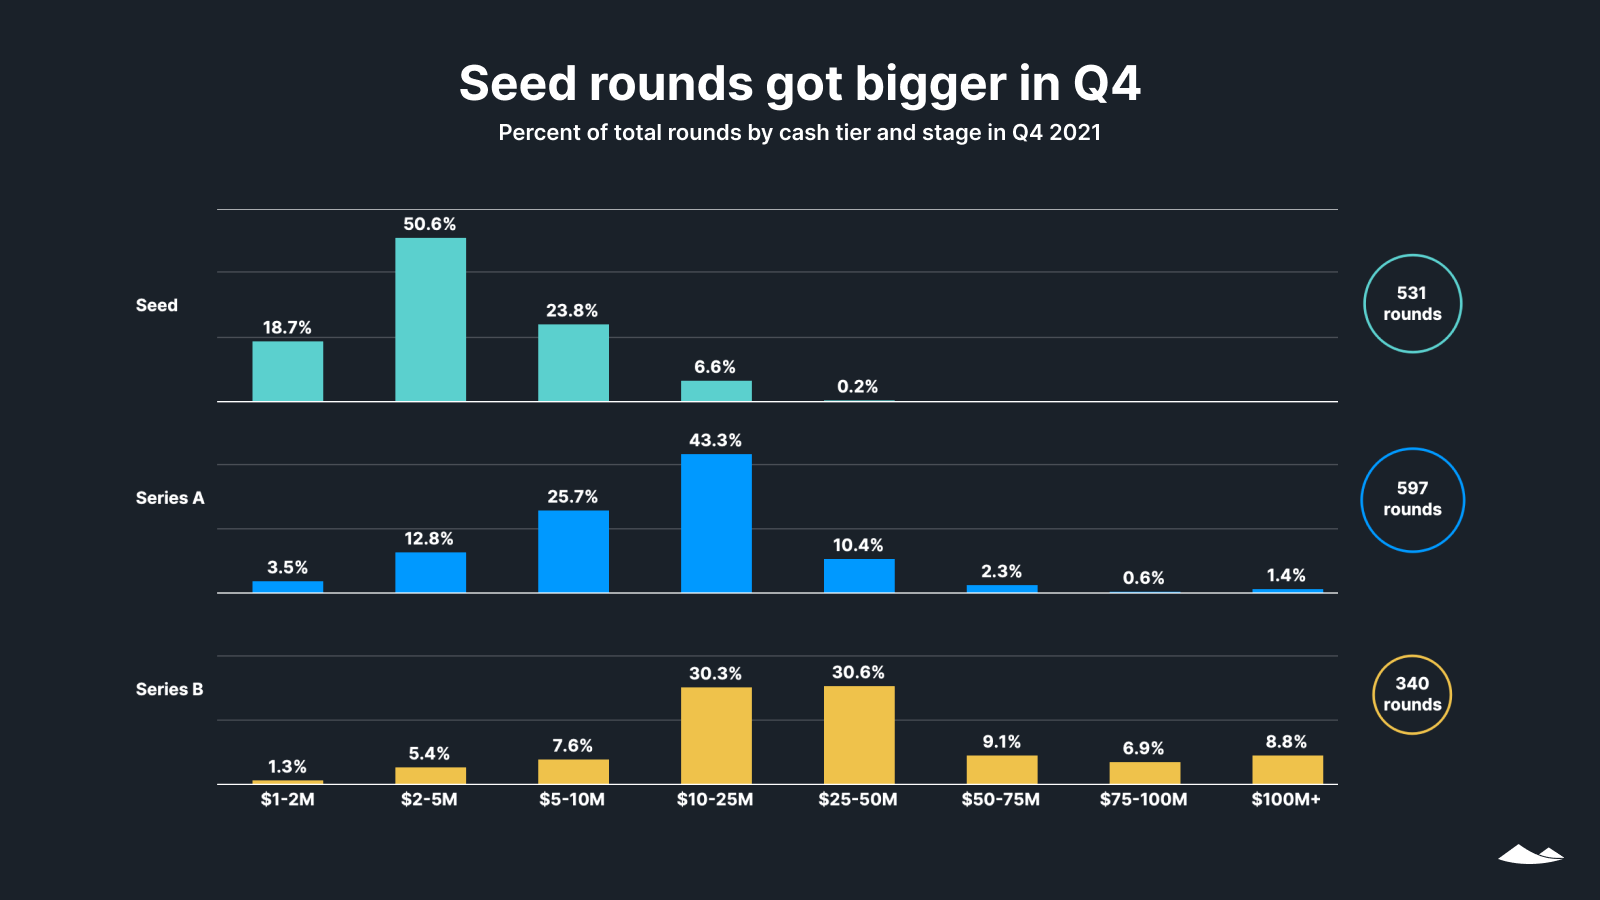 Seed rounds got bigger in Q4: Percent of total rounds by cash tier and early stage in Q4 2021